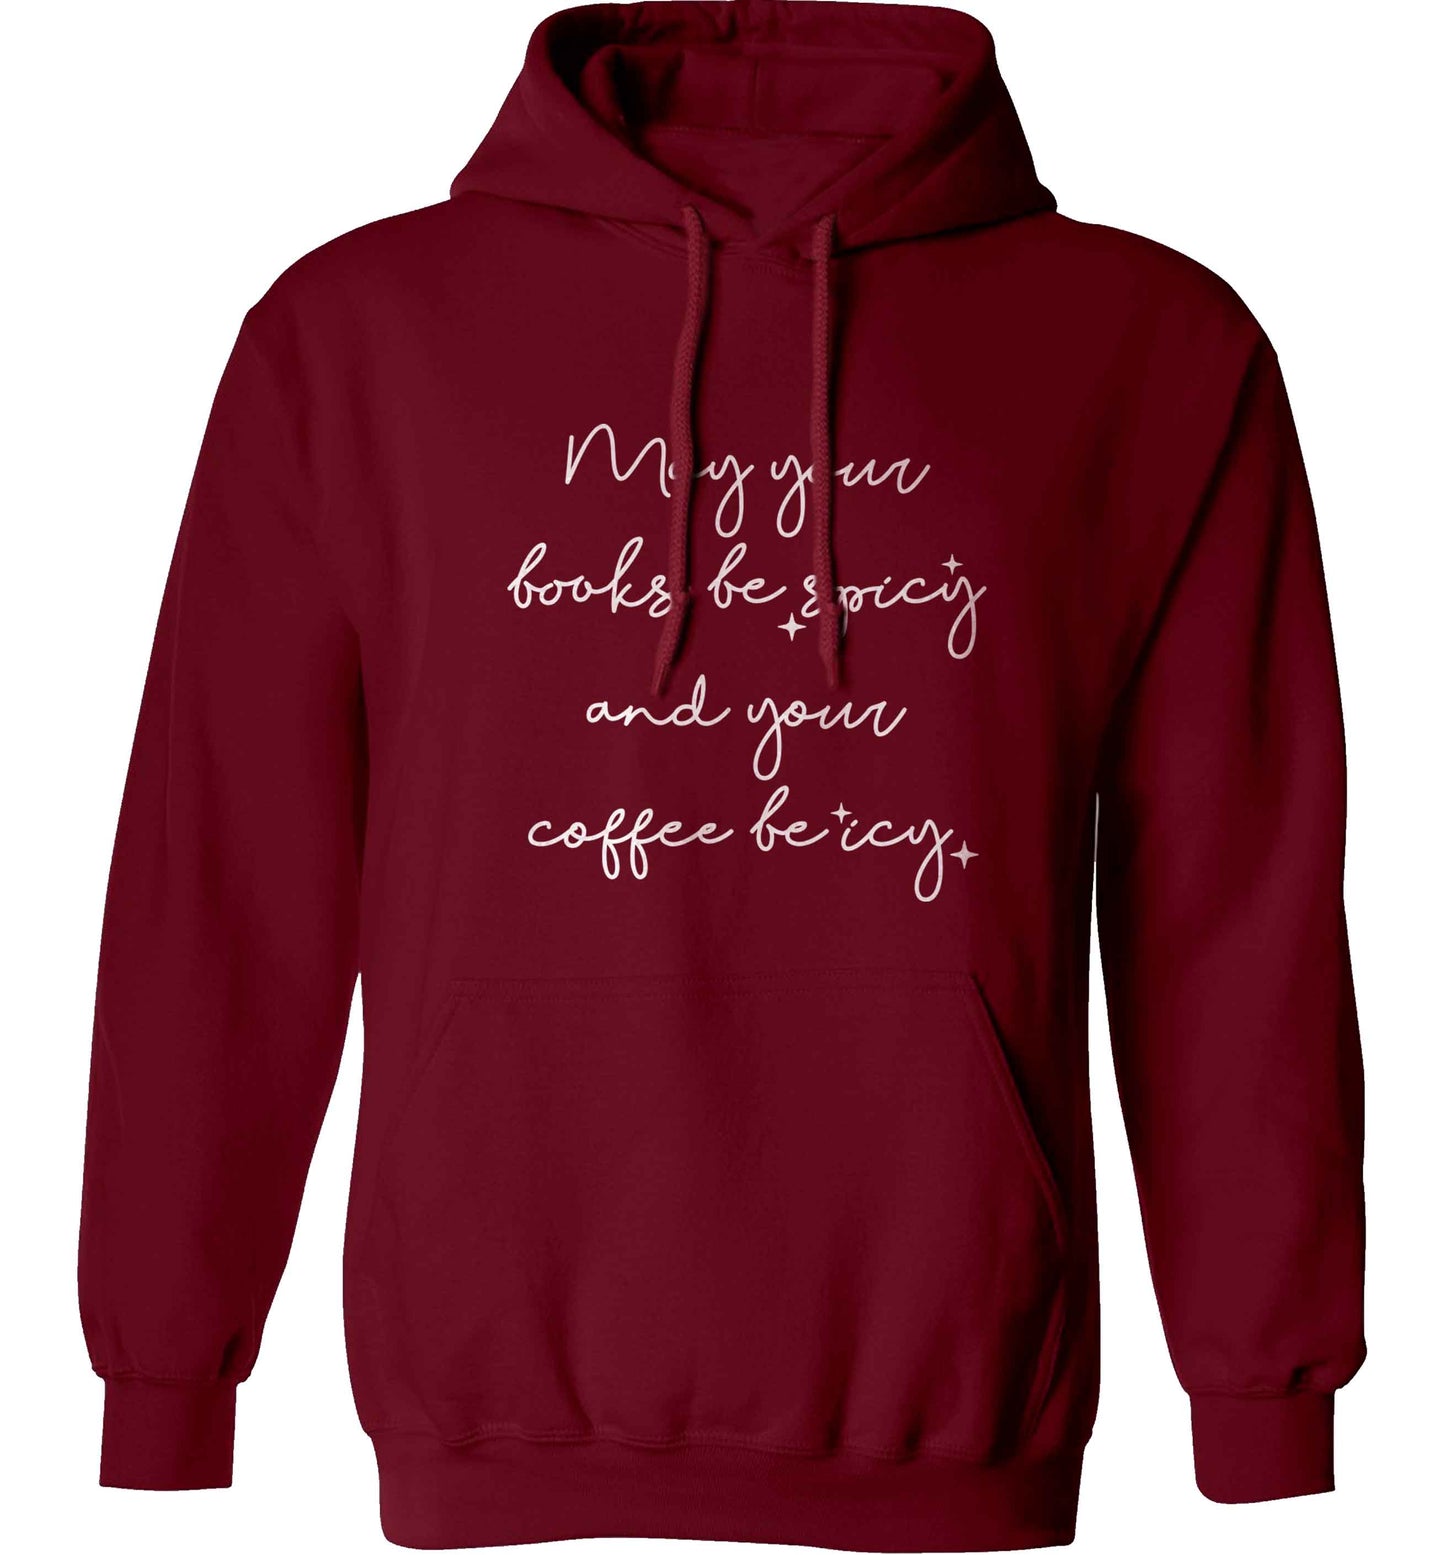 May your books be spicy and your coffee be icy adults unisex maroon hoodie 2XL